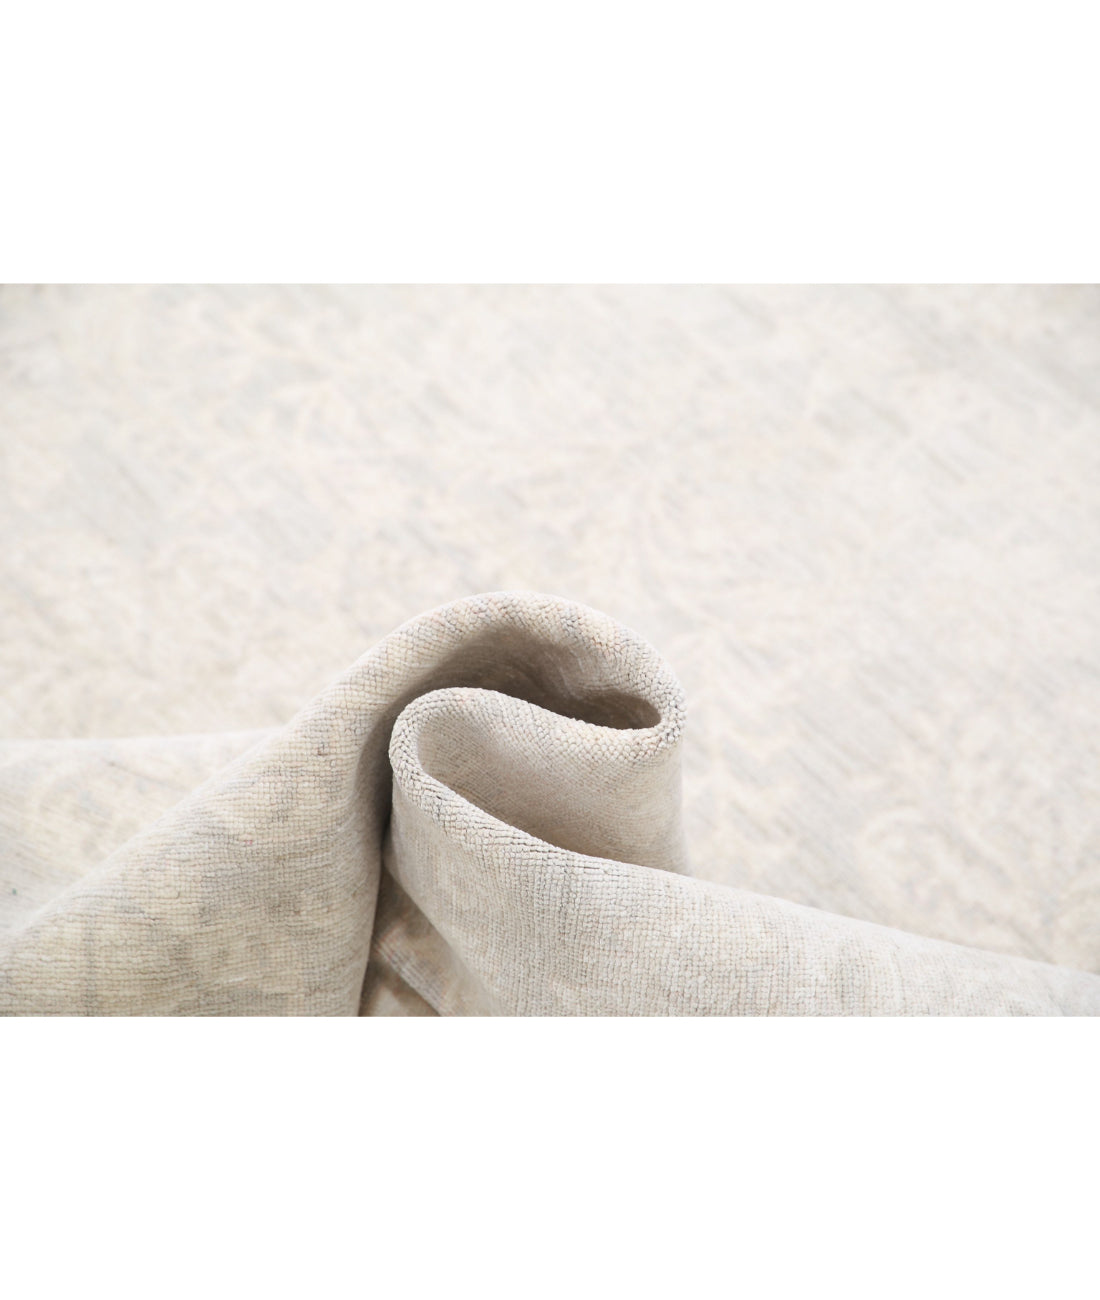 Hand Knotted Serenity Artemix Wool Rug - 7'8'' x 10'2'' 7'8'' x 10'2'' (230 X 305) / Ivory / Taupe